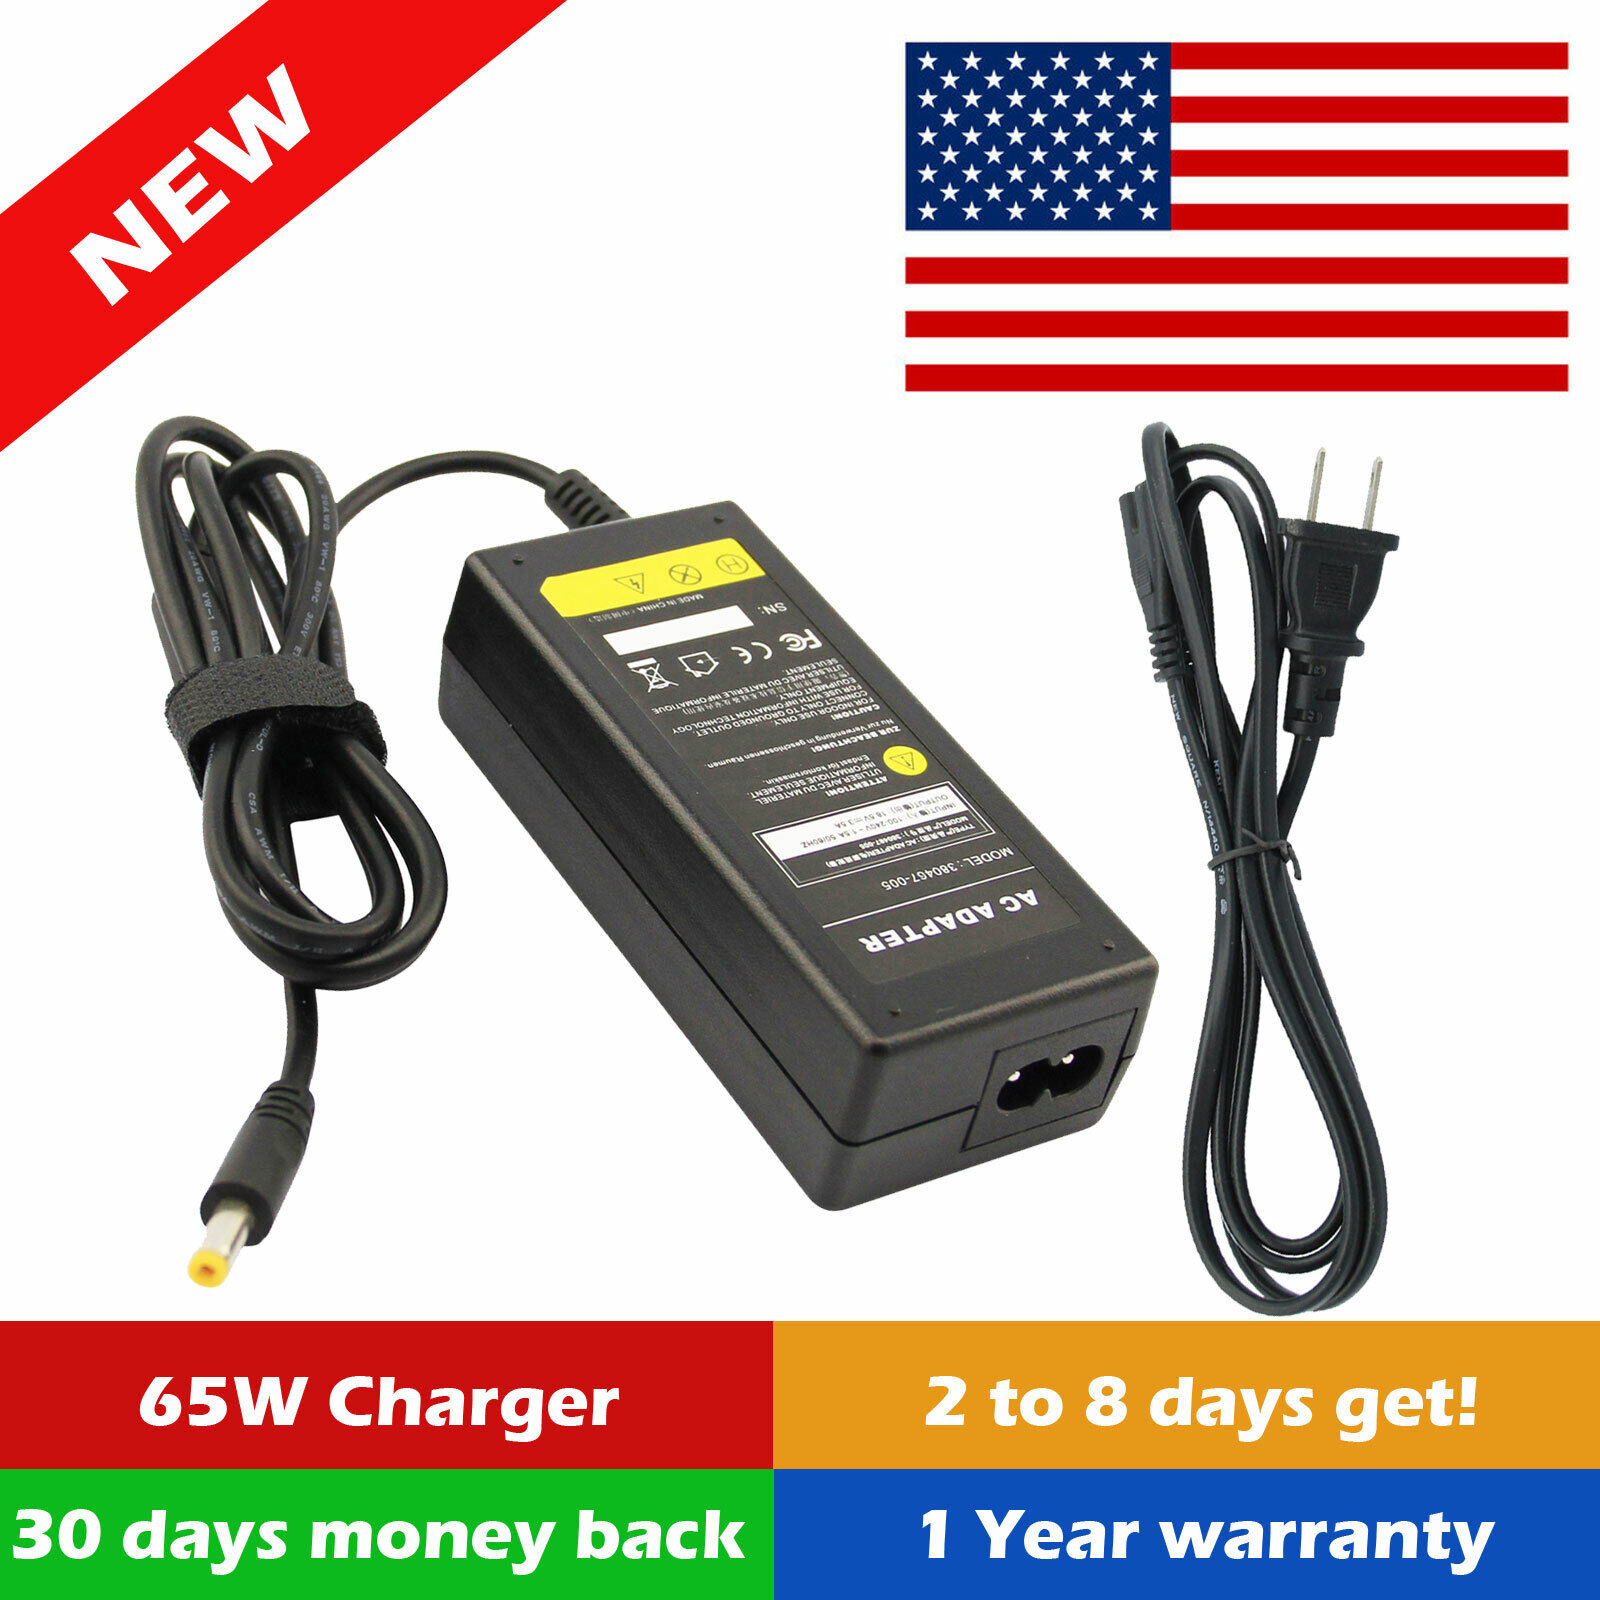 65W AC Adapter Battery Charger Power For HP Compaq Presario C500 C700 Laptop